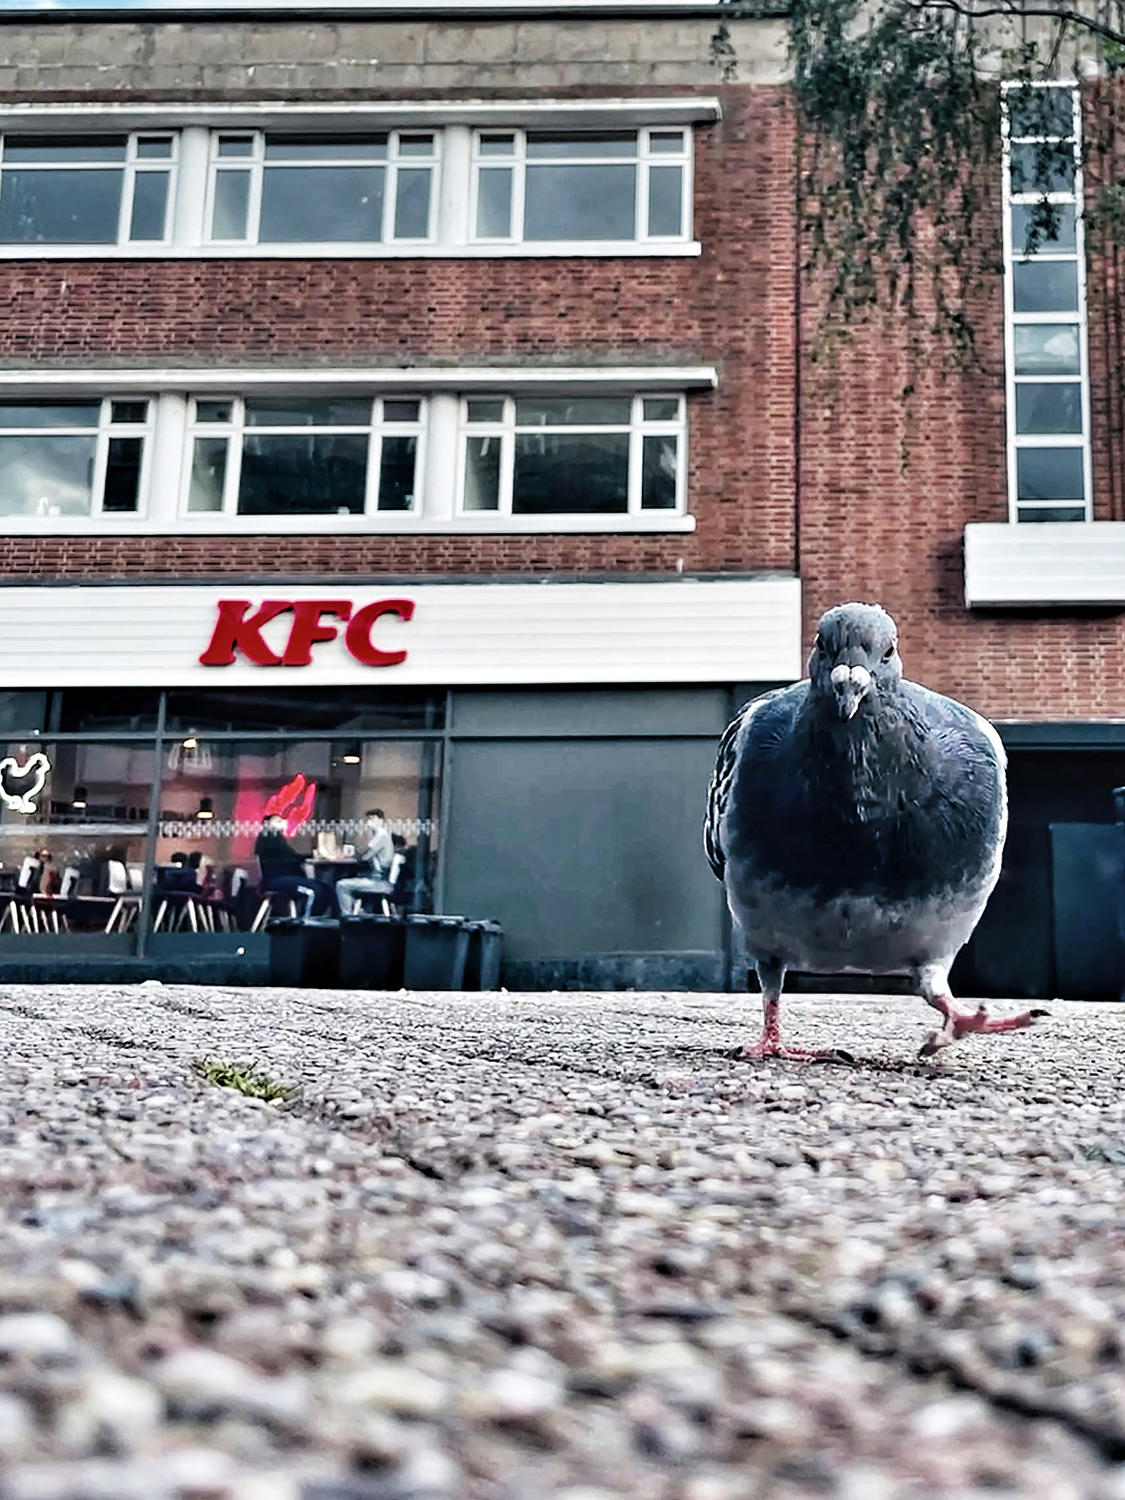 A close-up photograph of a pigeon, in front of a fast-food restaurant with a white sign with red text reading 'KFC' visible.